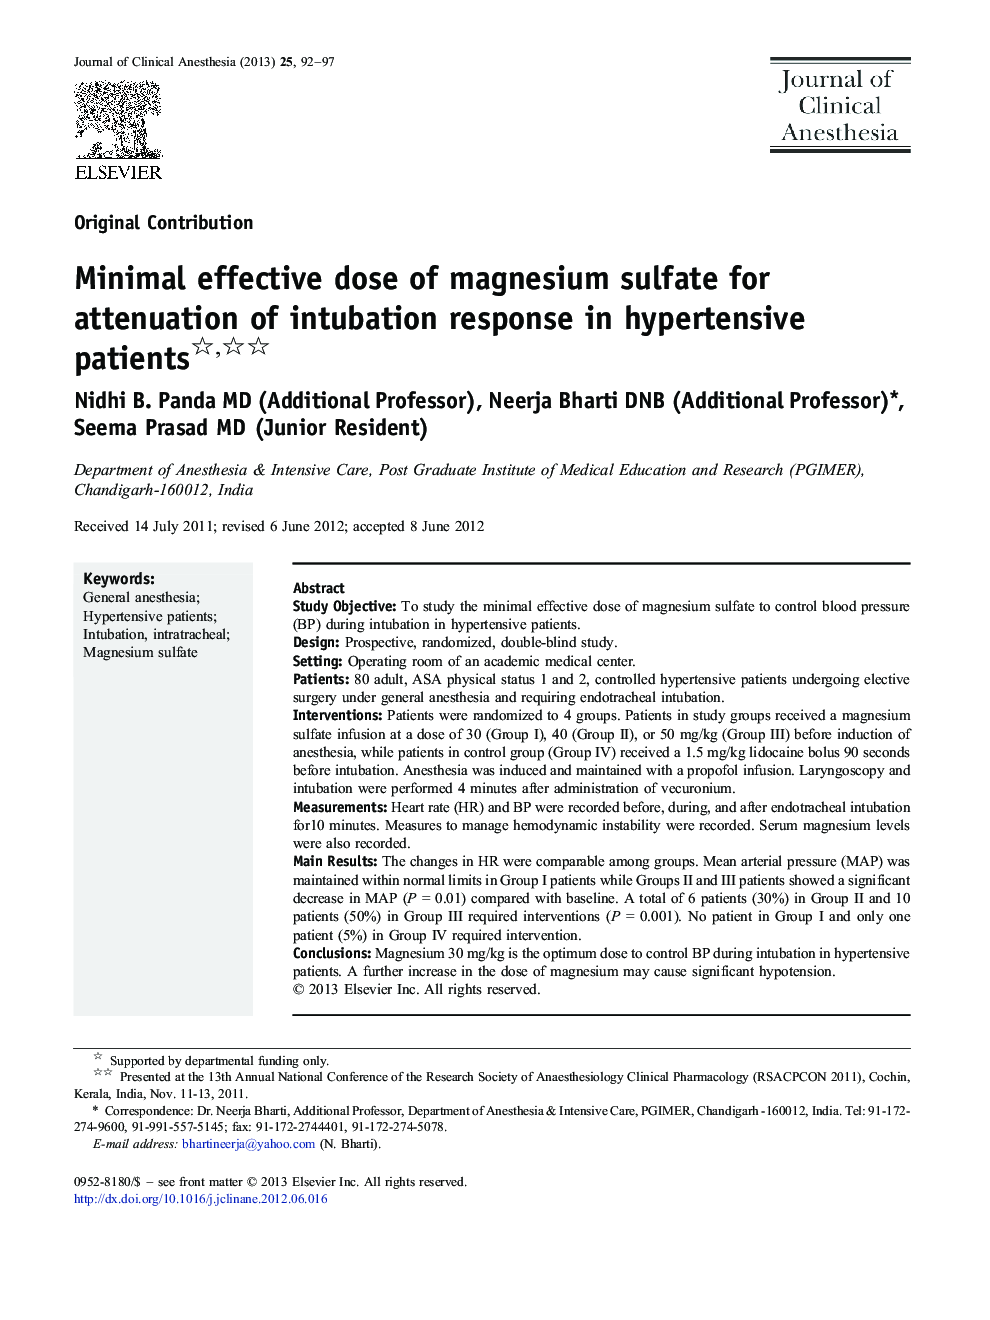 Minimal effective dose of magnesium sulfate for attenuation of intubation response in hypertensive patients 